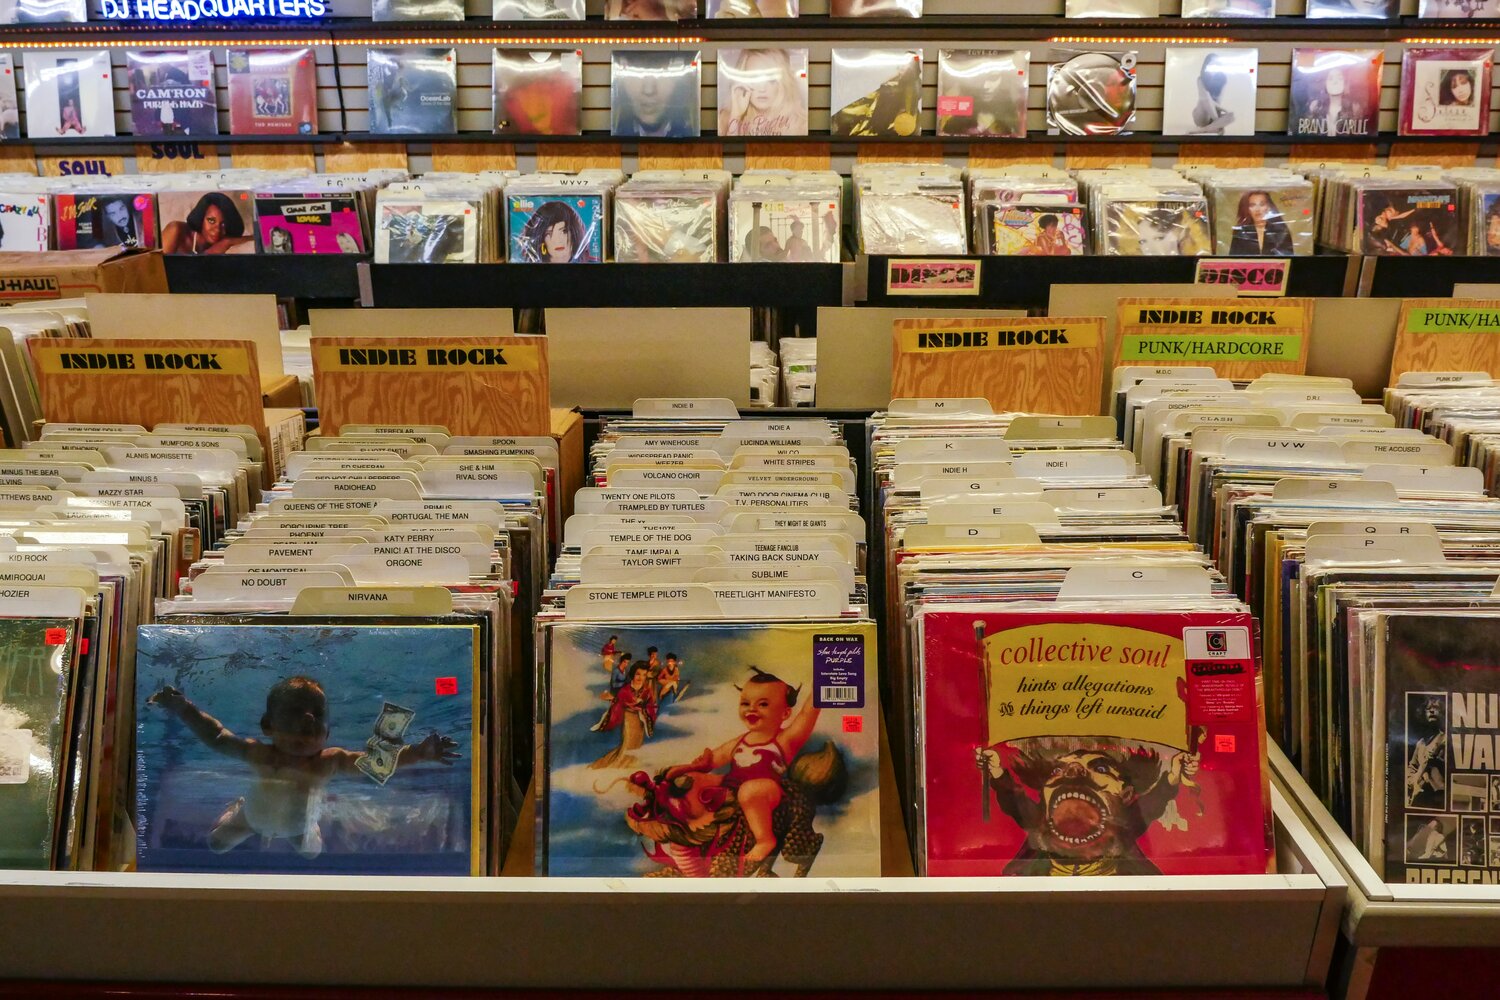 Alternative rock CDs from the 1990s are displayed in a record store.